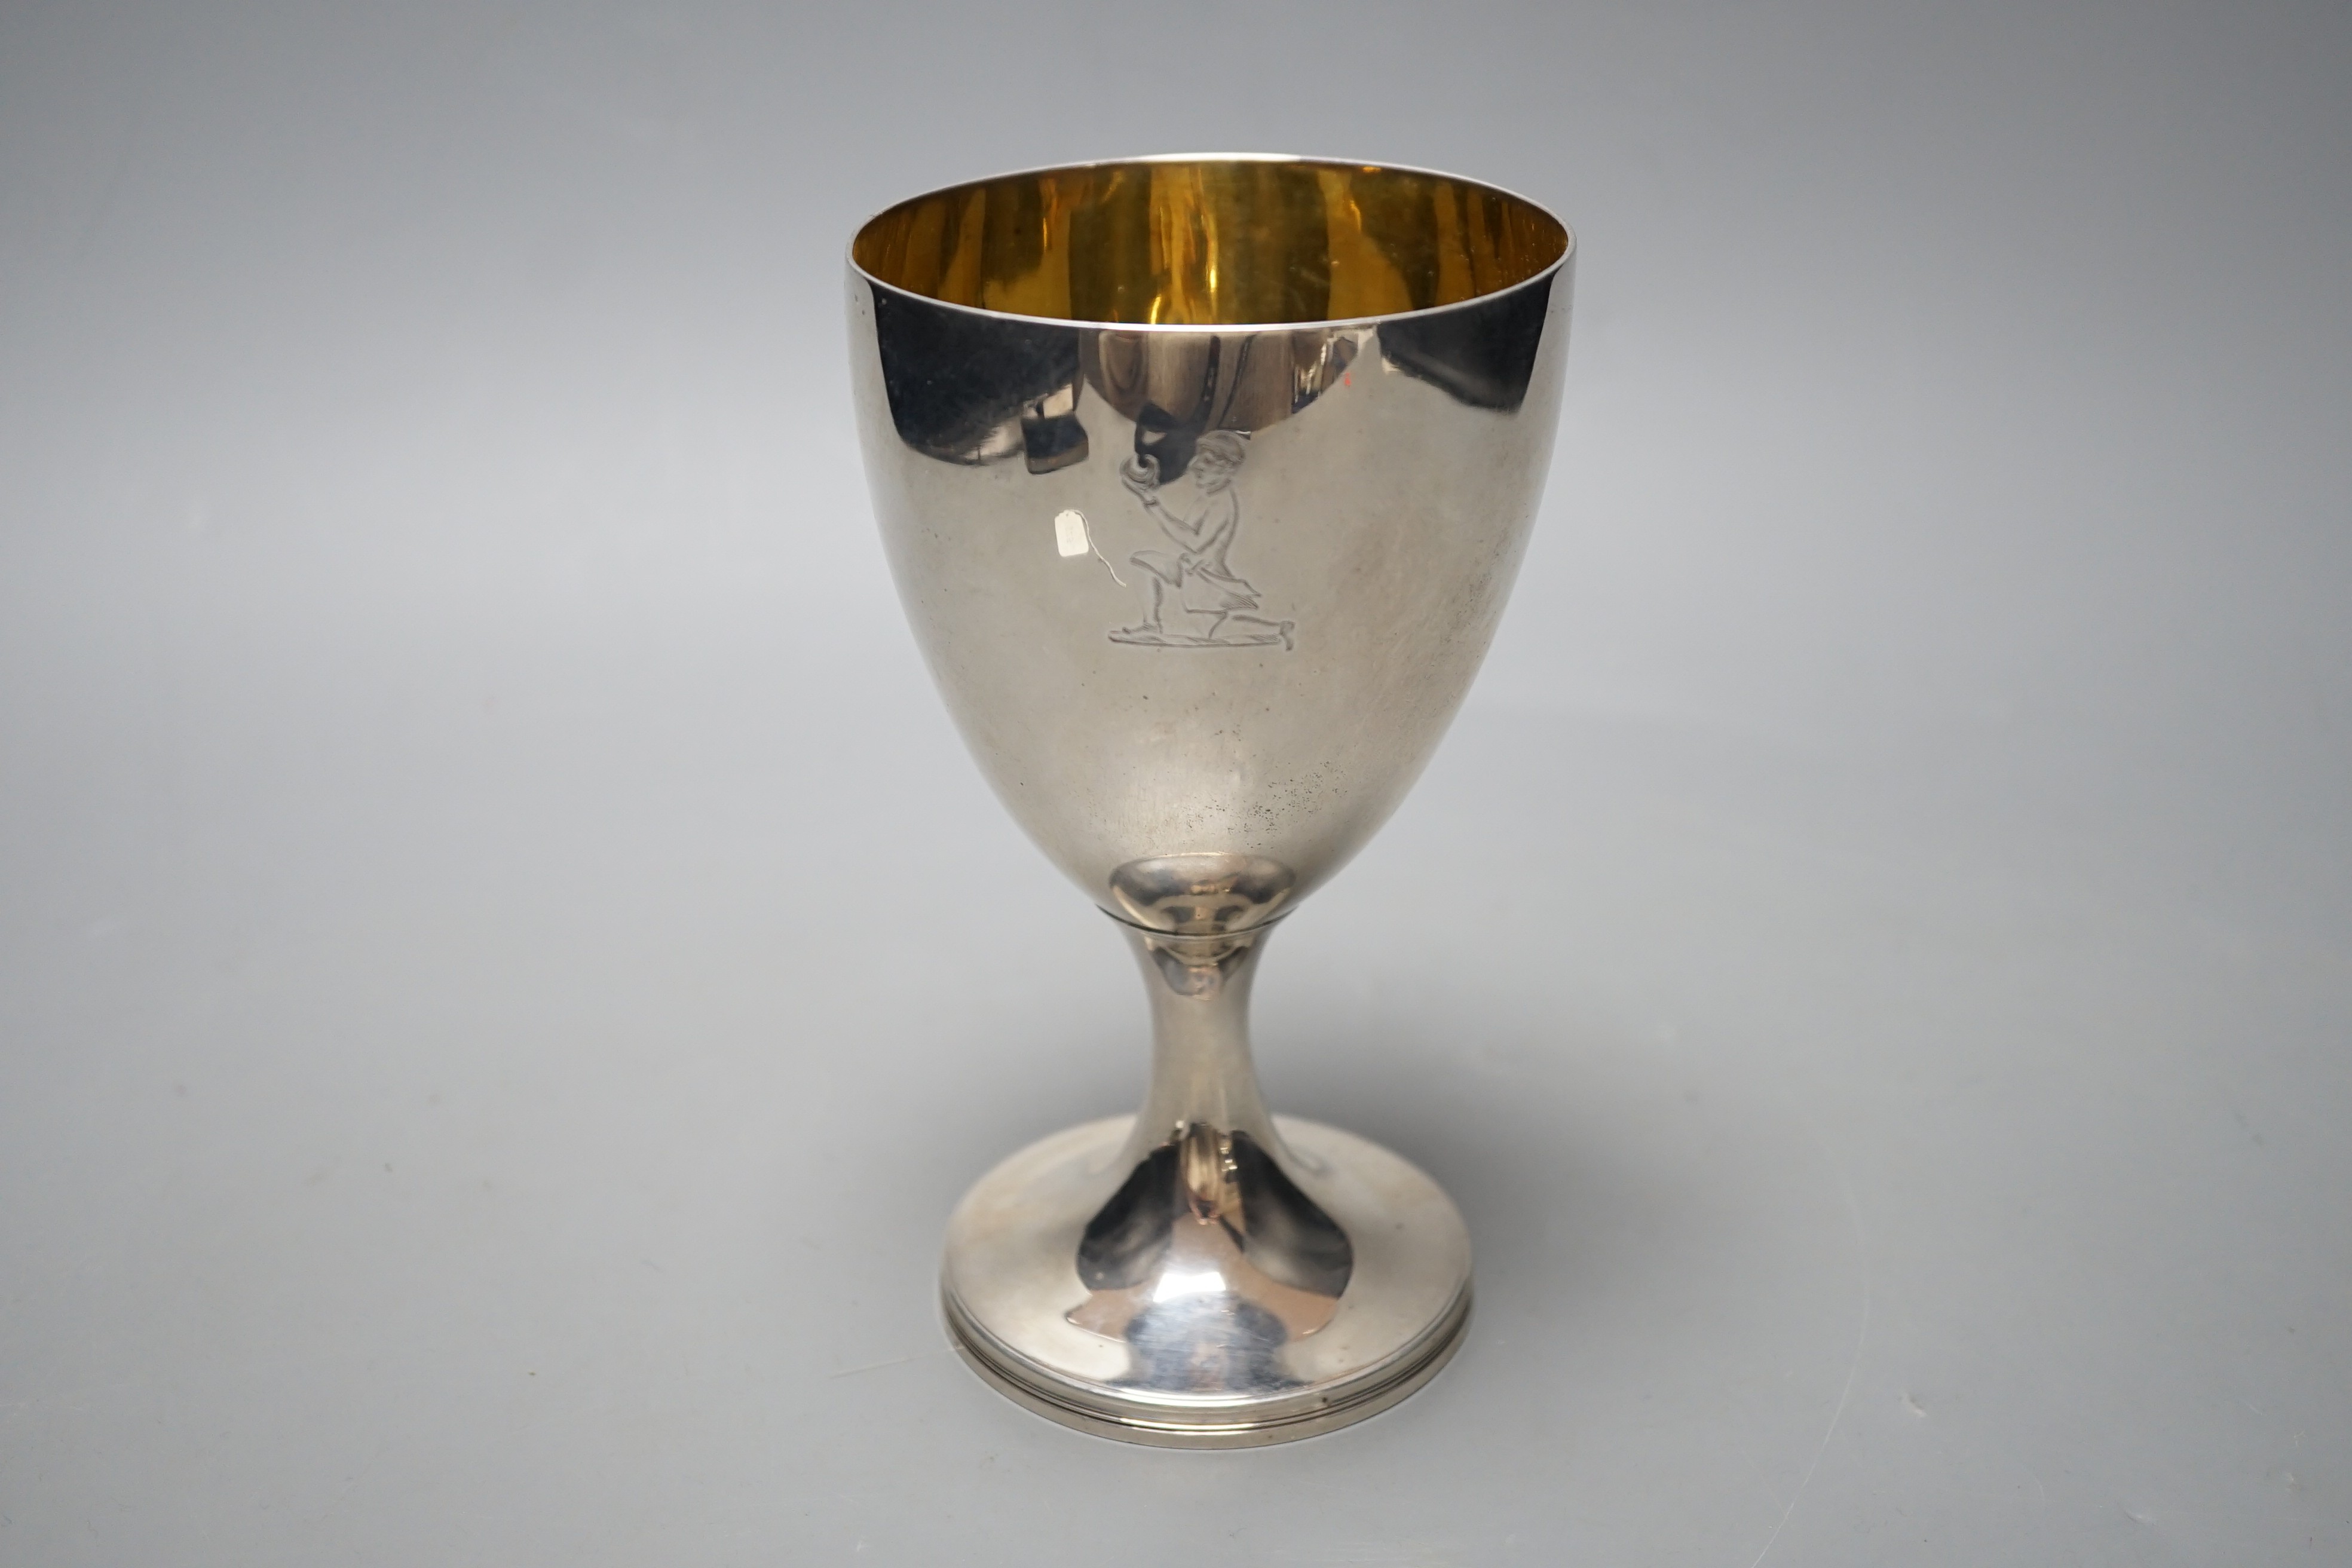 A George III silver goblet, by James Mince, London, 1792, with engraved crest, height 15.5cm, 7.6oz.